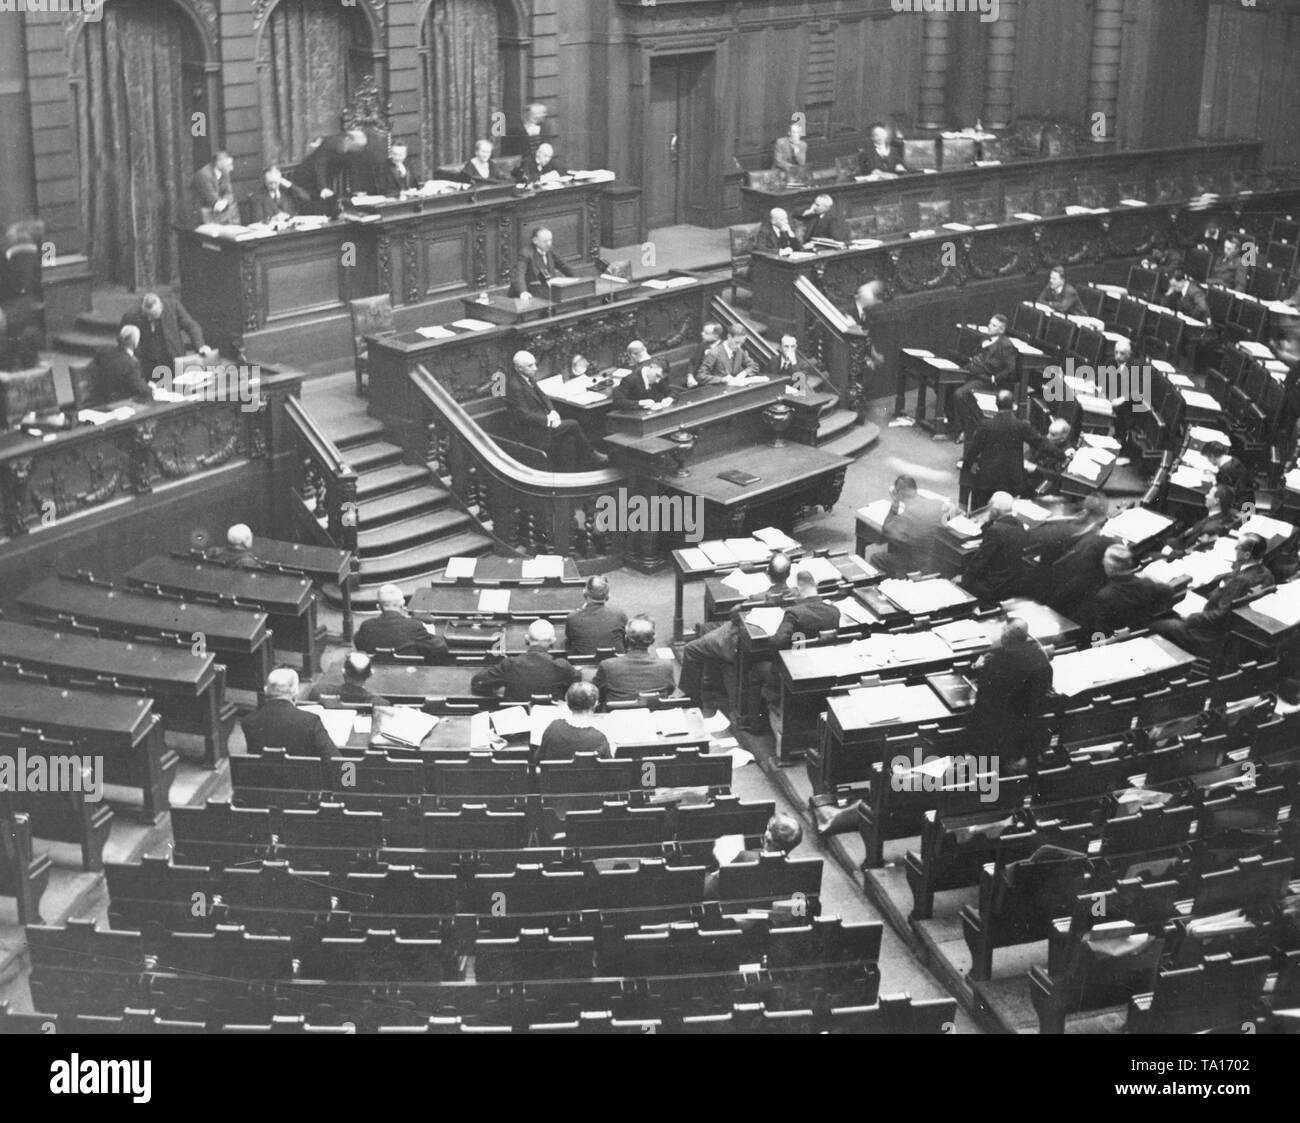 Despite the important budget consultations many seats in the Reichstag remain empty. Stock Photo